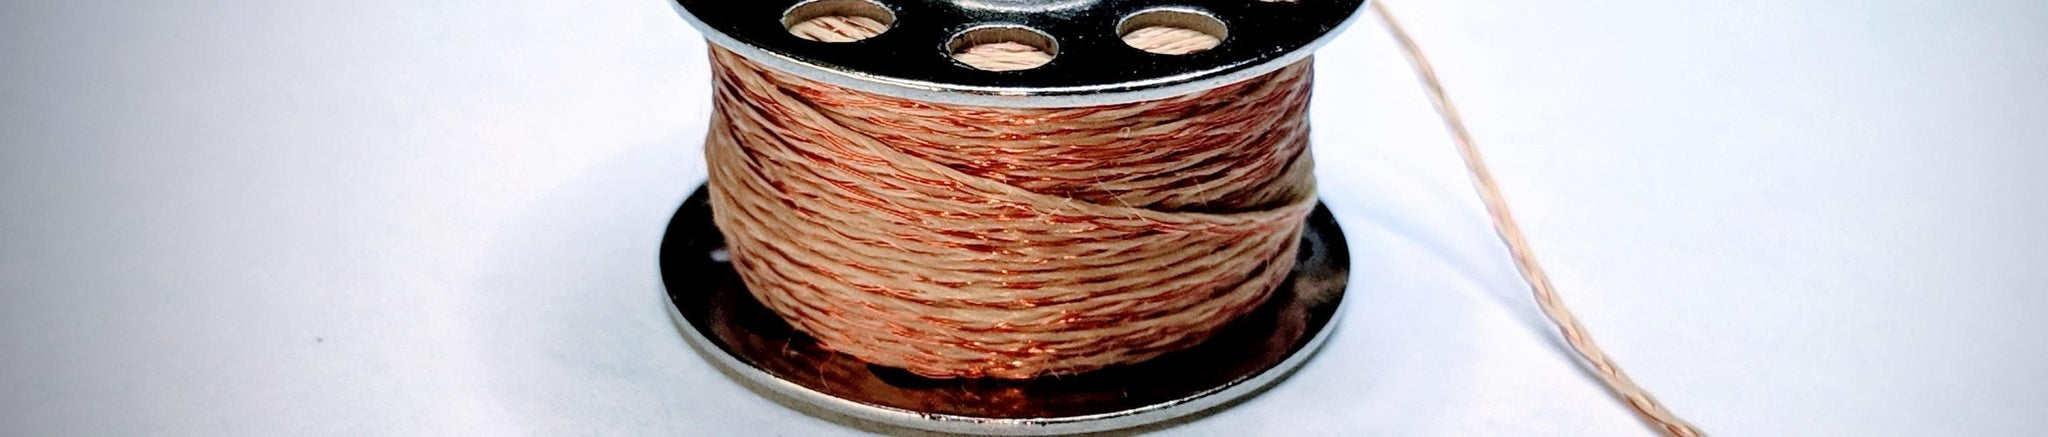 Insulated Conductive Thread - 45ft / 13.7m